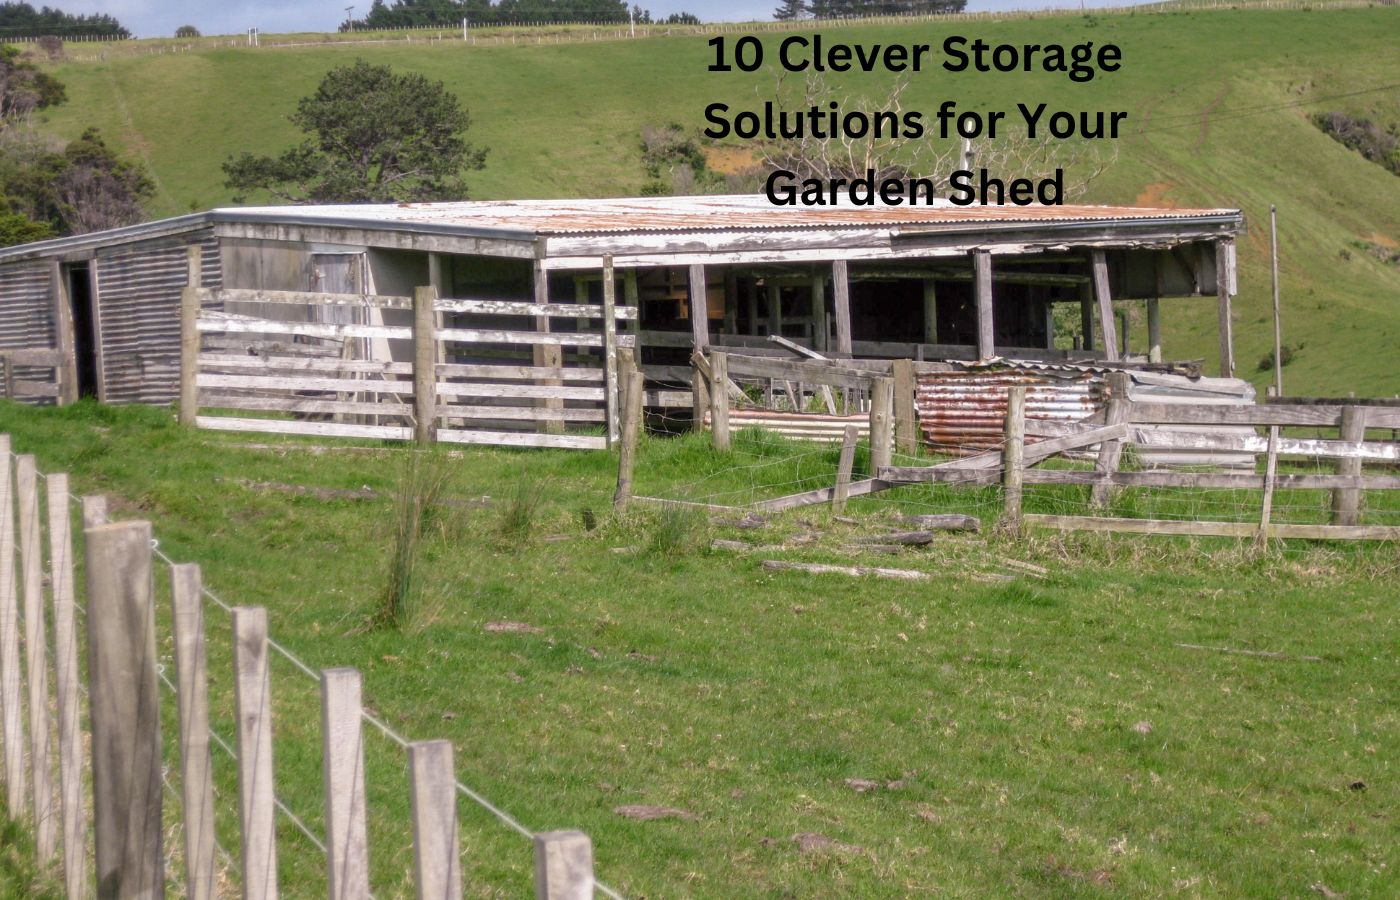 Clever Storage Solutions for Your Garden Shed